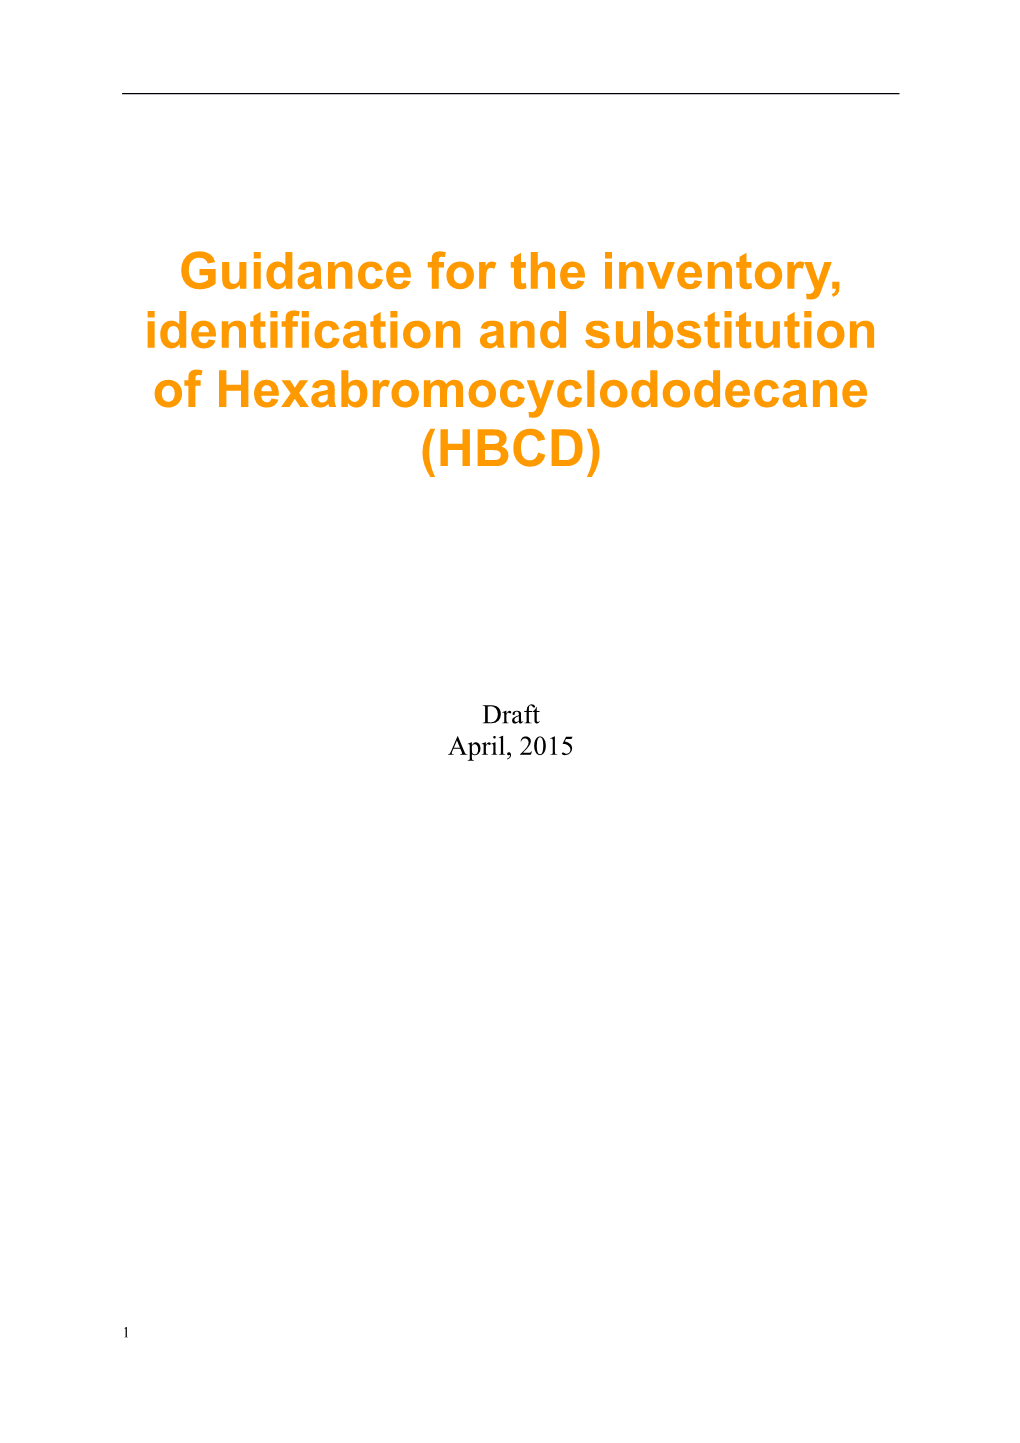 Guidance for the Identification and Substitution of Hexabromocyclododecane (HBCD)